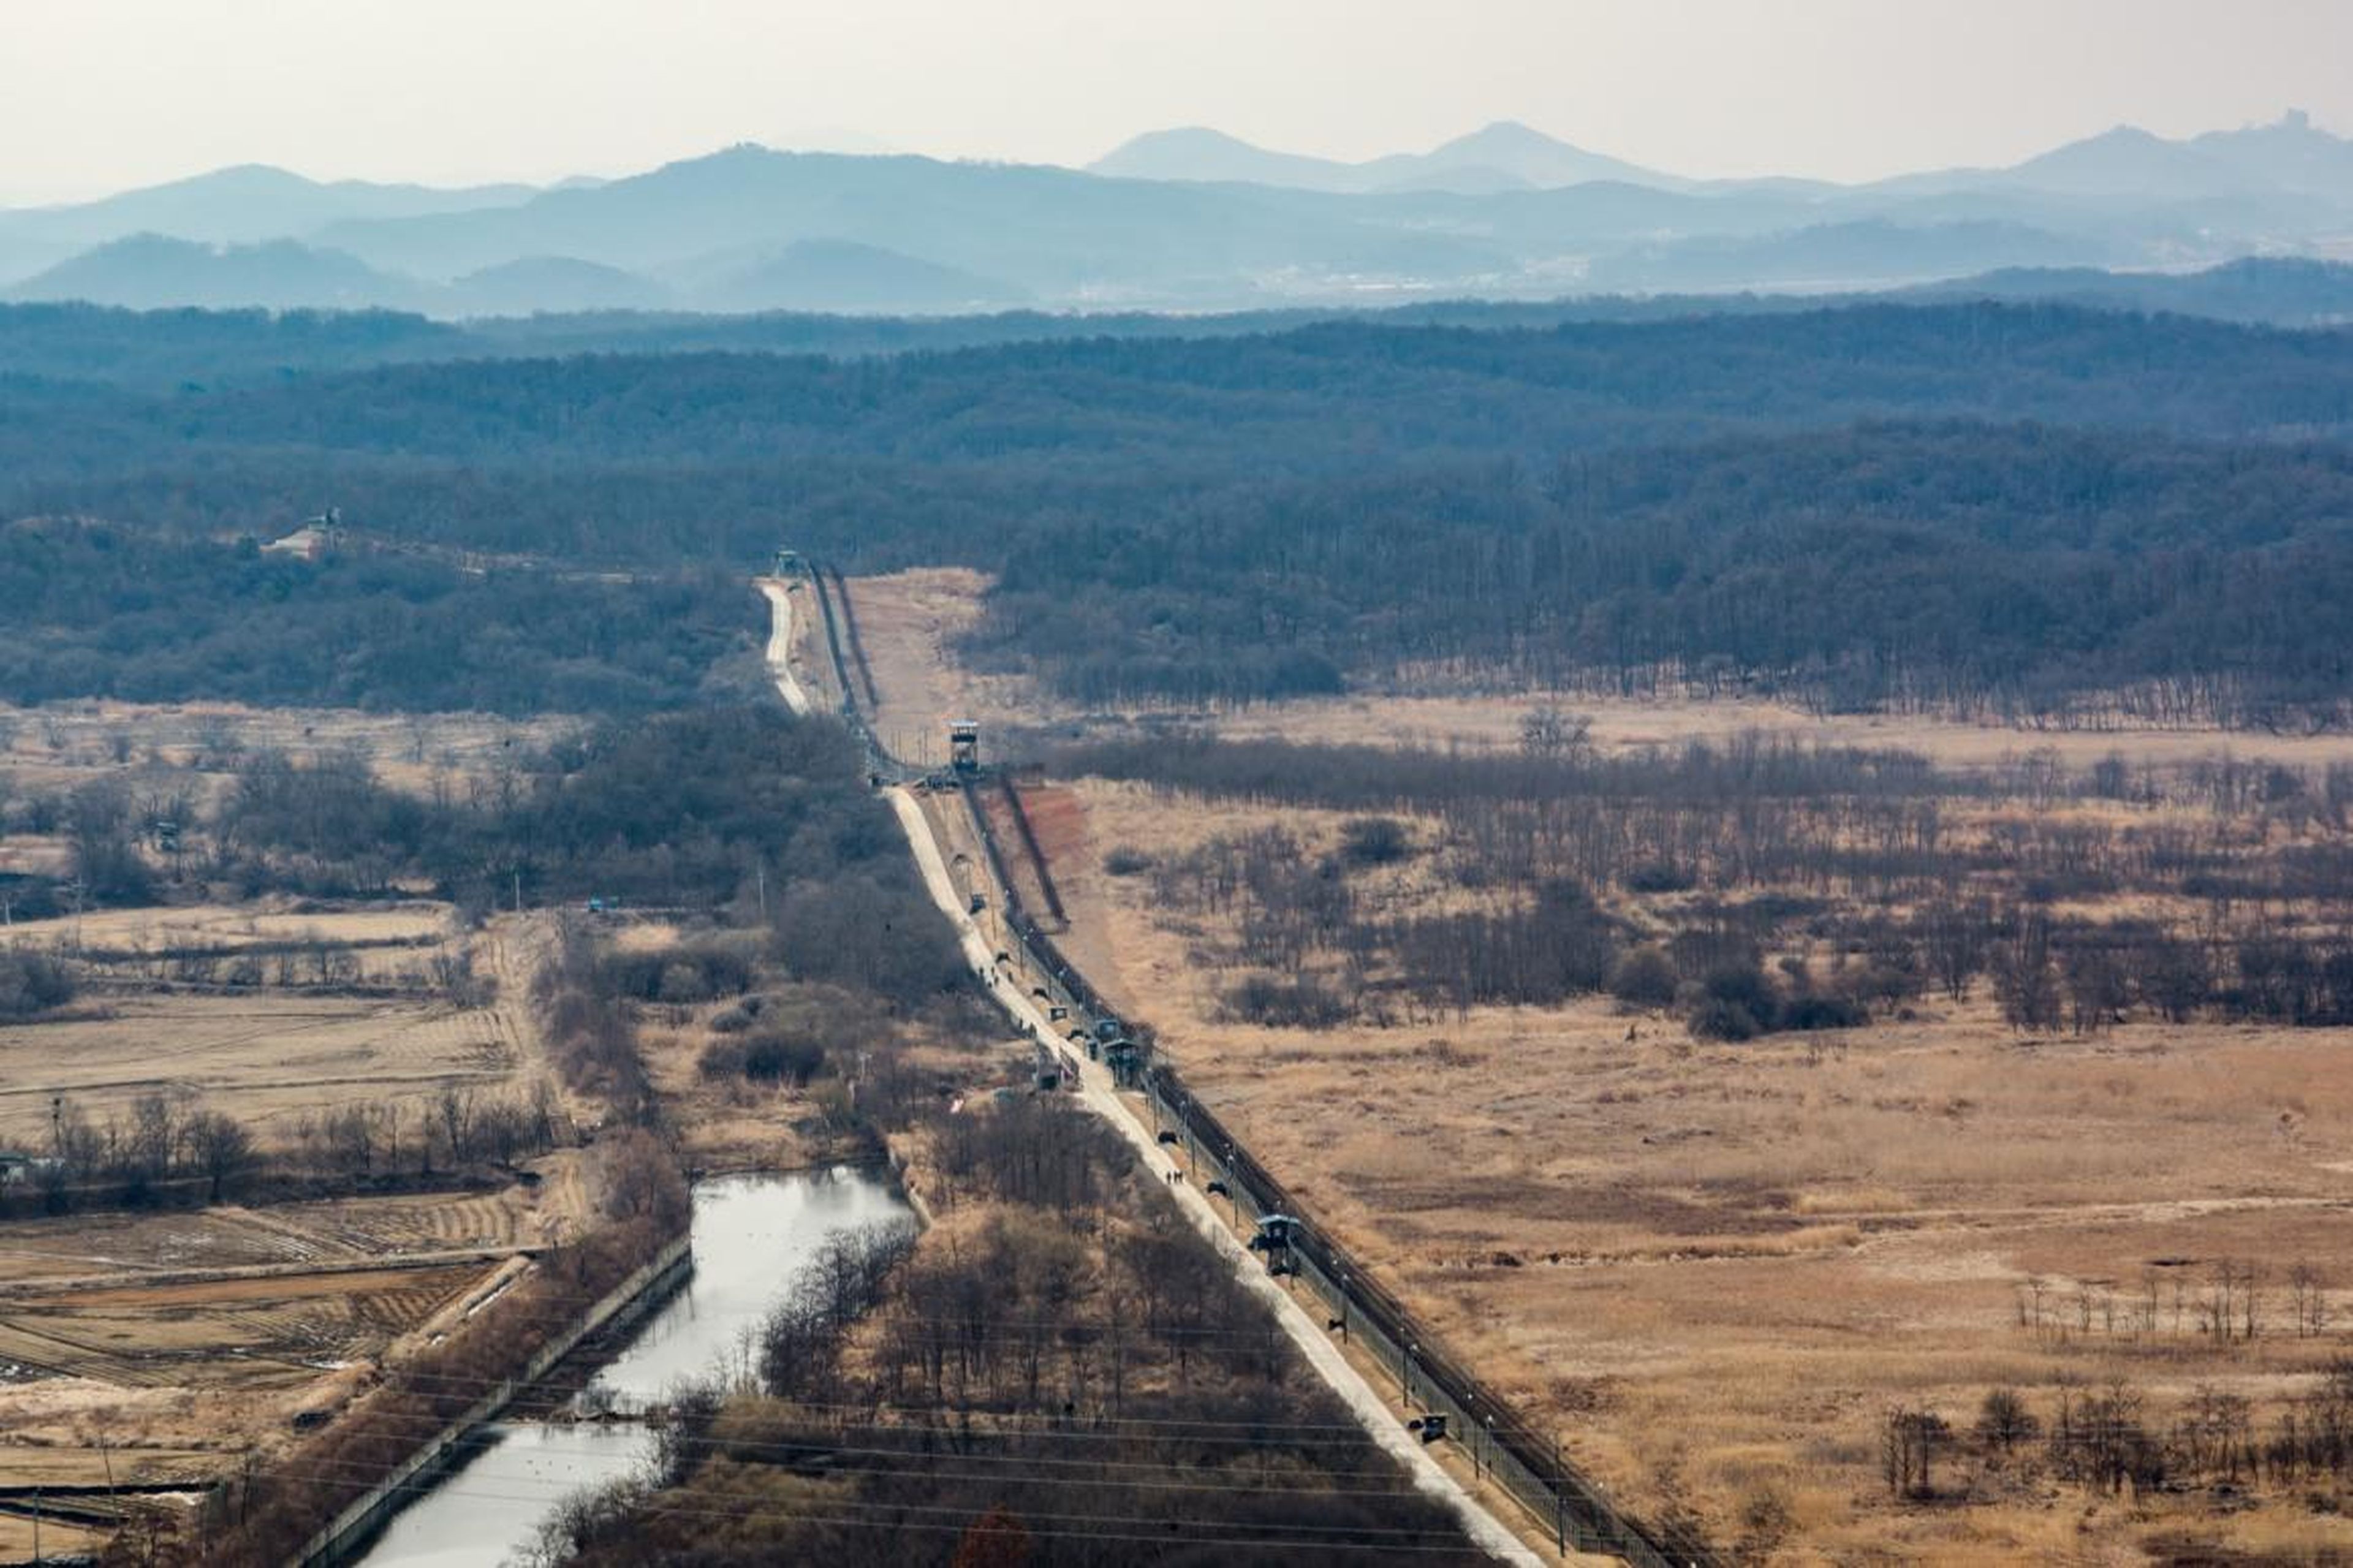 In South Korea, I took a day trip to the country's border with North Korea, also known as the demilitarized zone, or DMZ. It's one of the world's most heavily fortified borders.